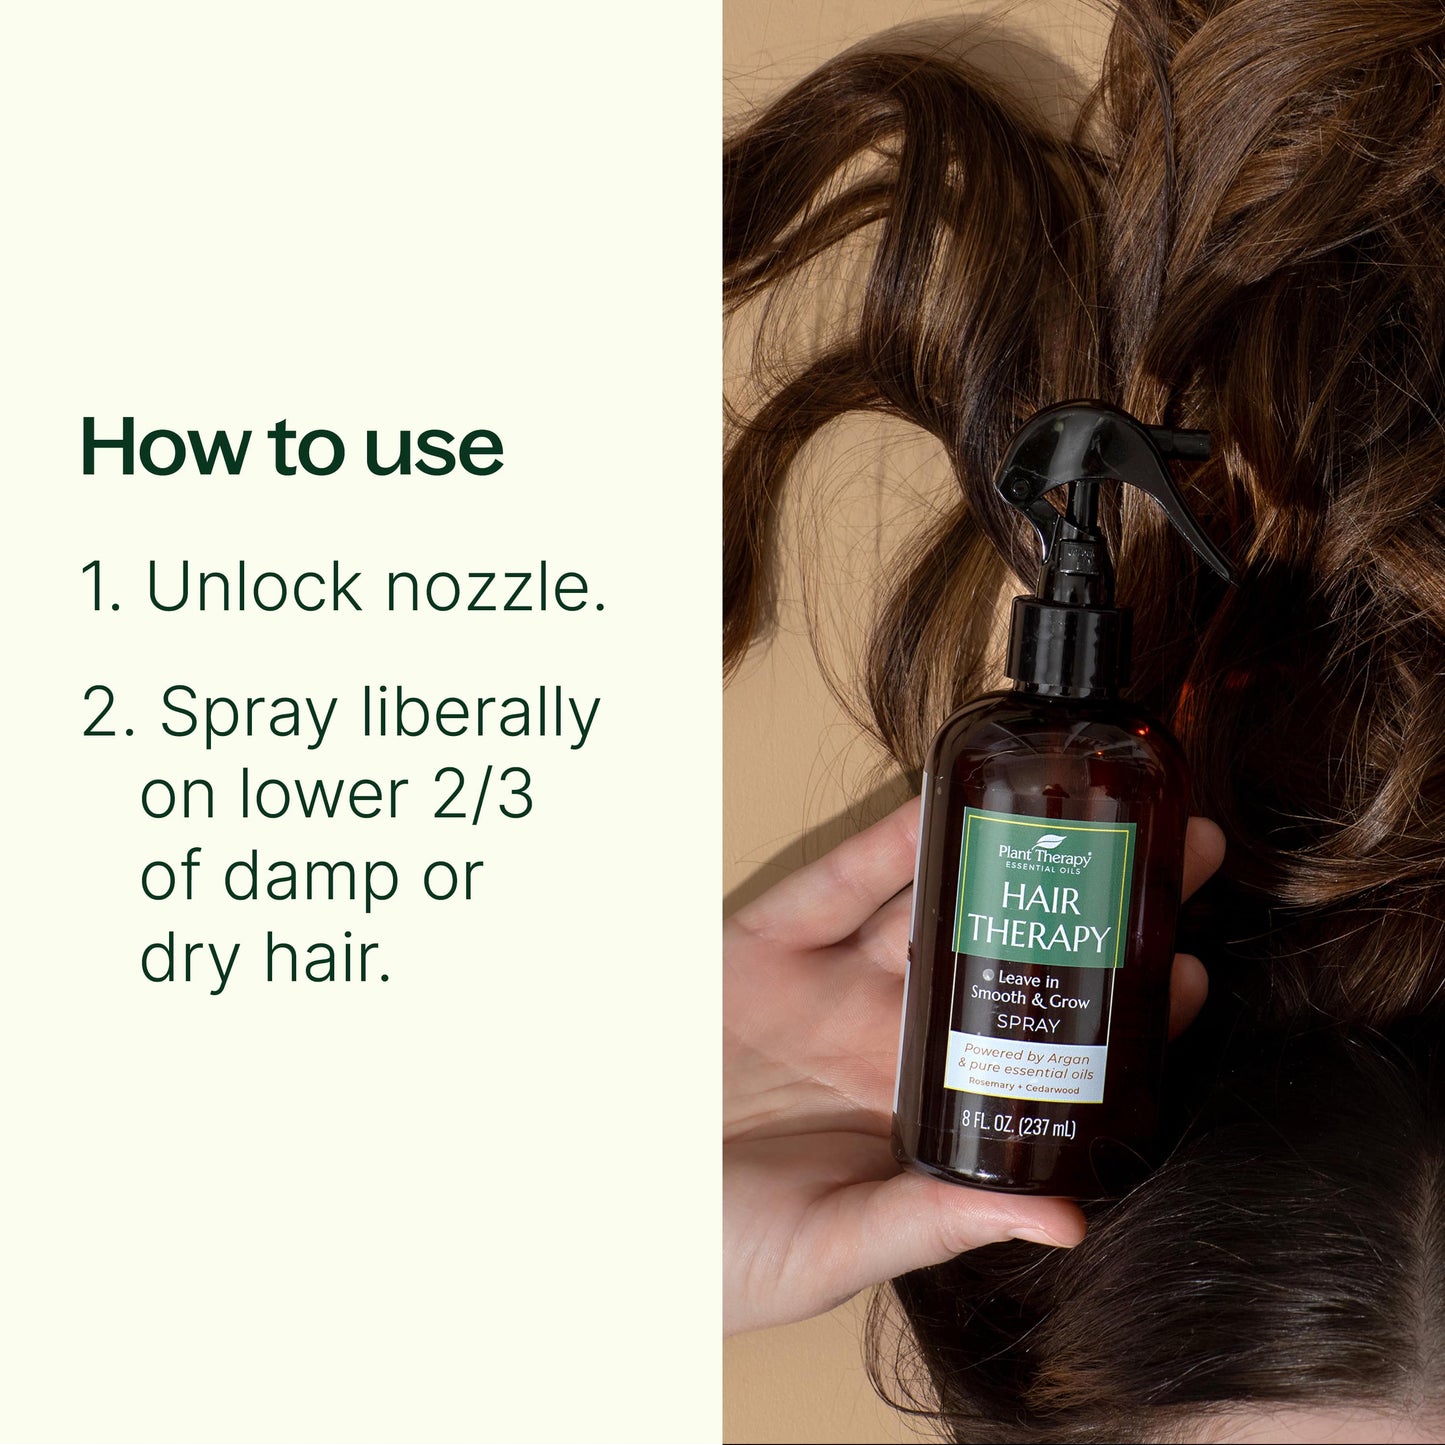 how to use Hair Therapy Leave In Smooth & Grow Spray